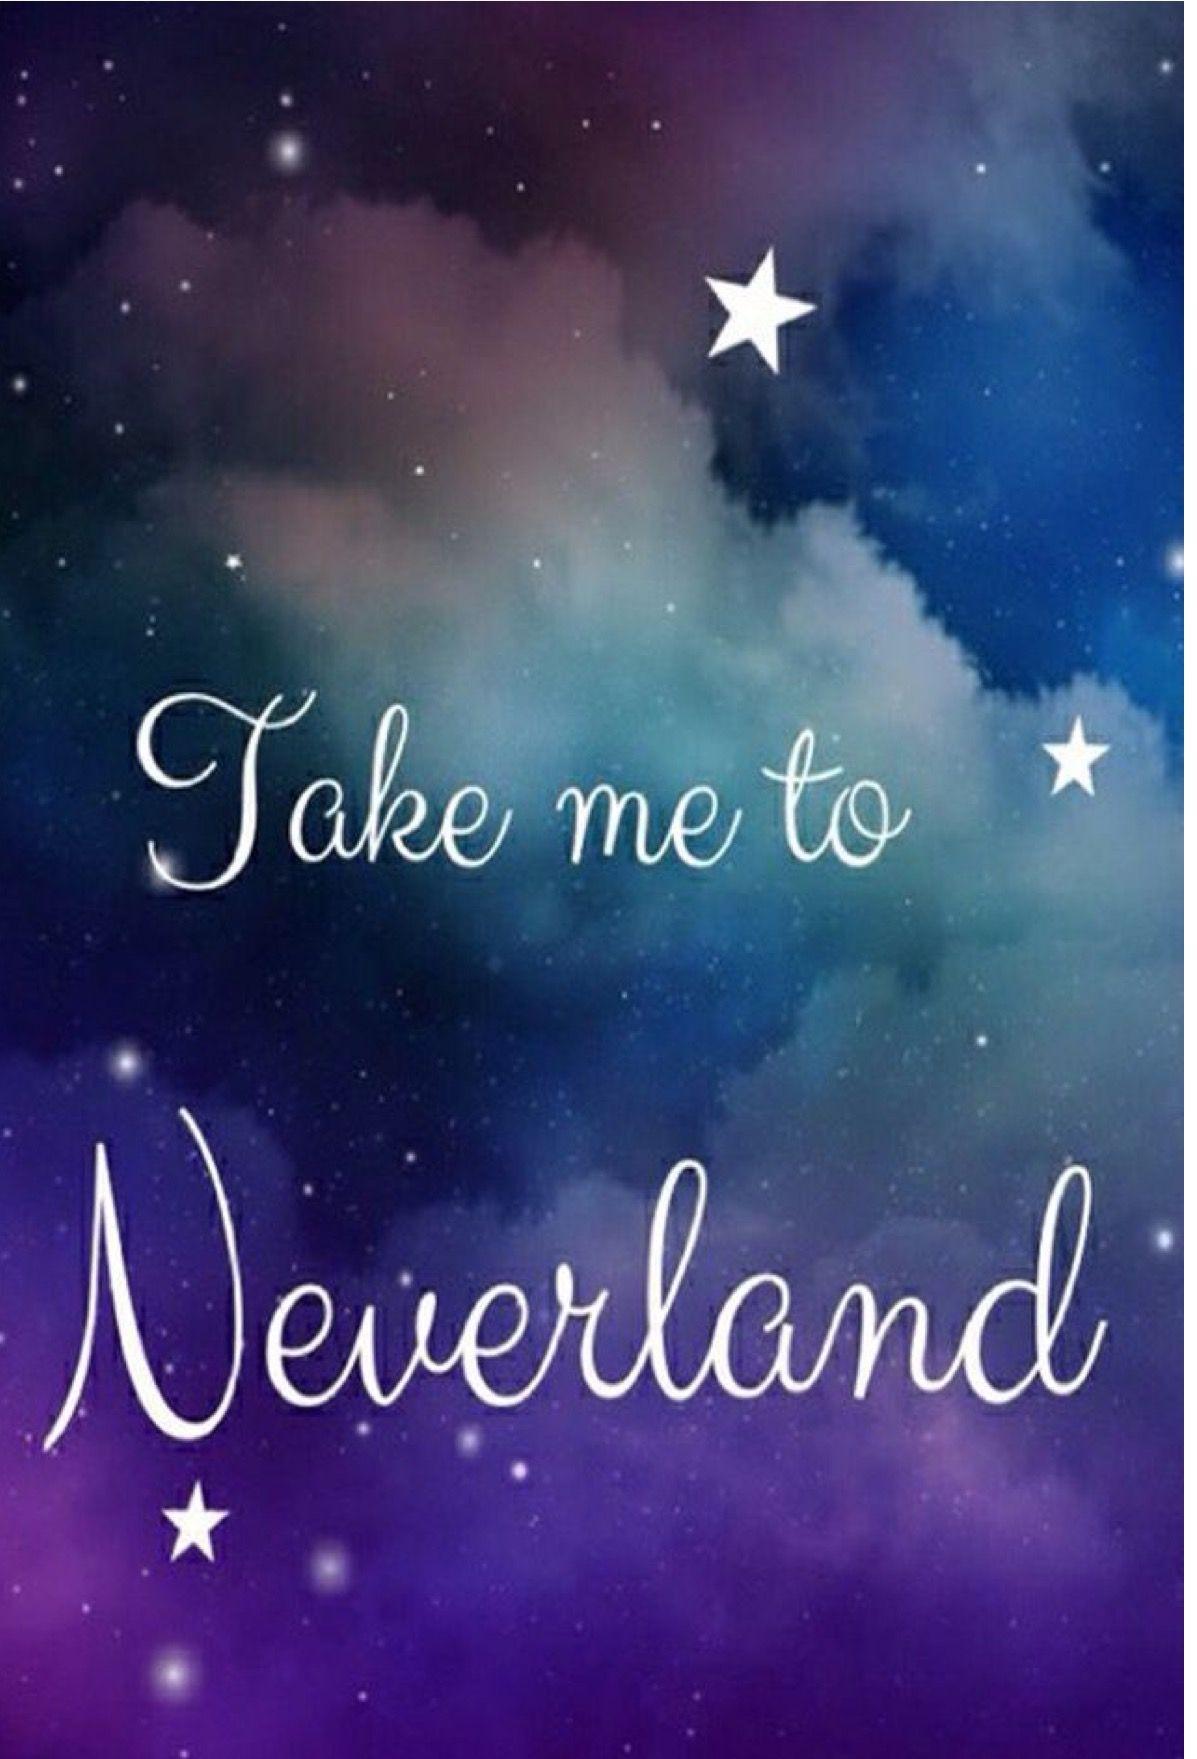 peter pan quotes background